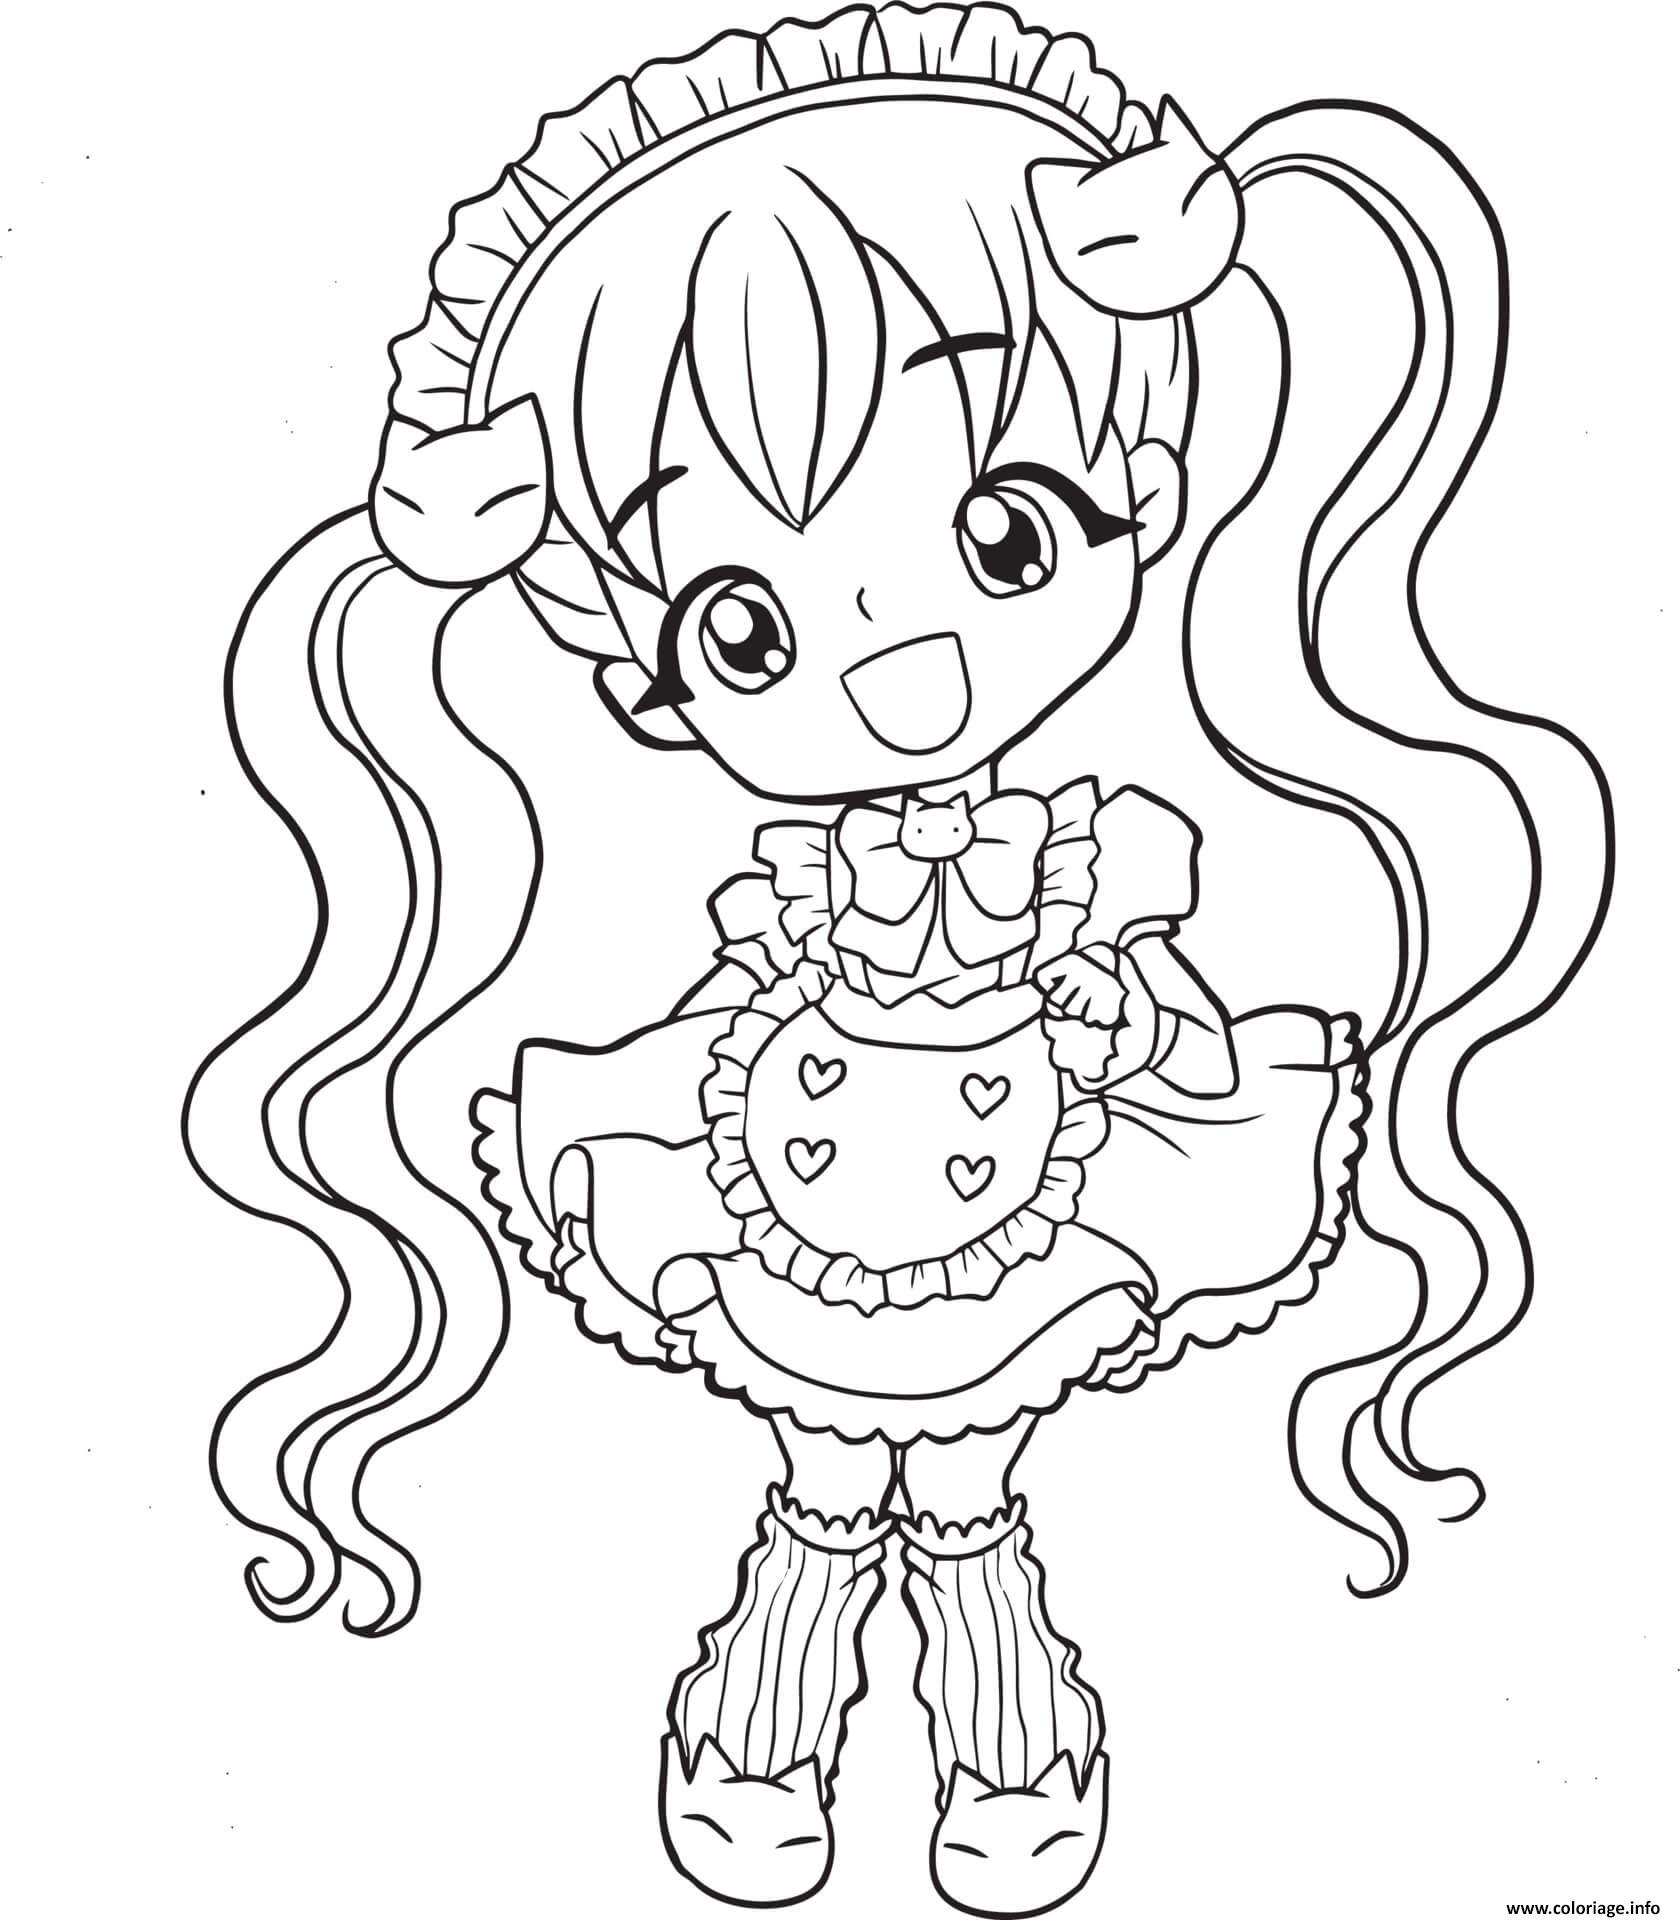 https://coloriage.info/images/ccovers/1679876016adorable-fille-manga-8-ans.jpg